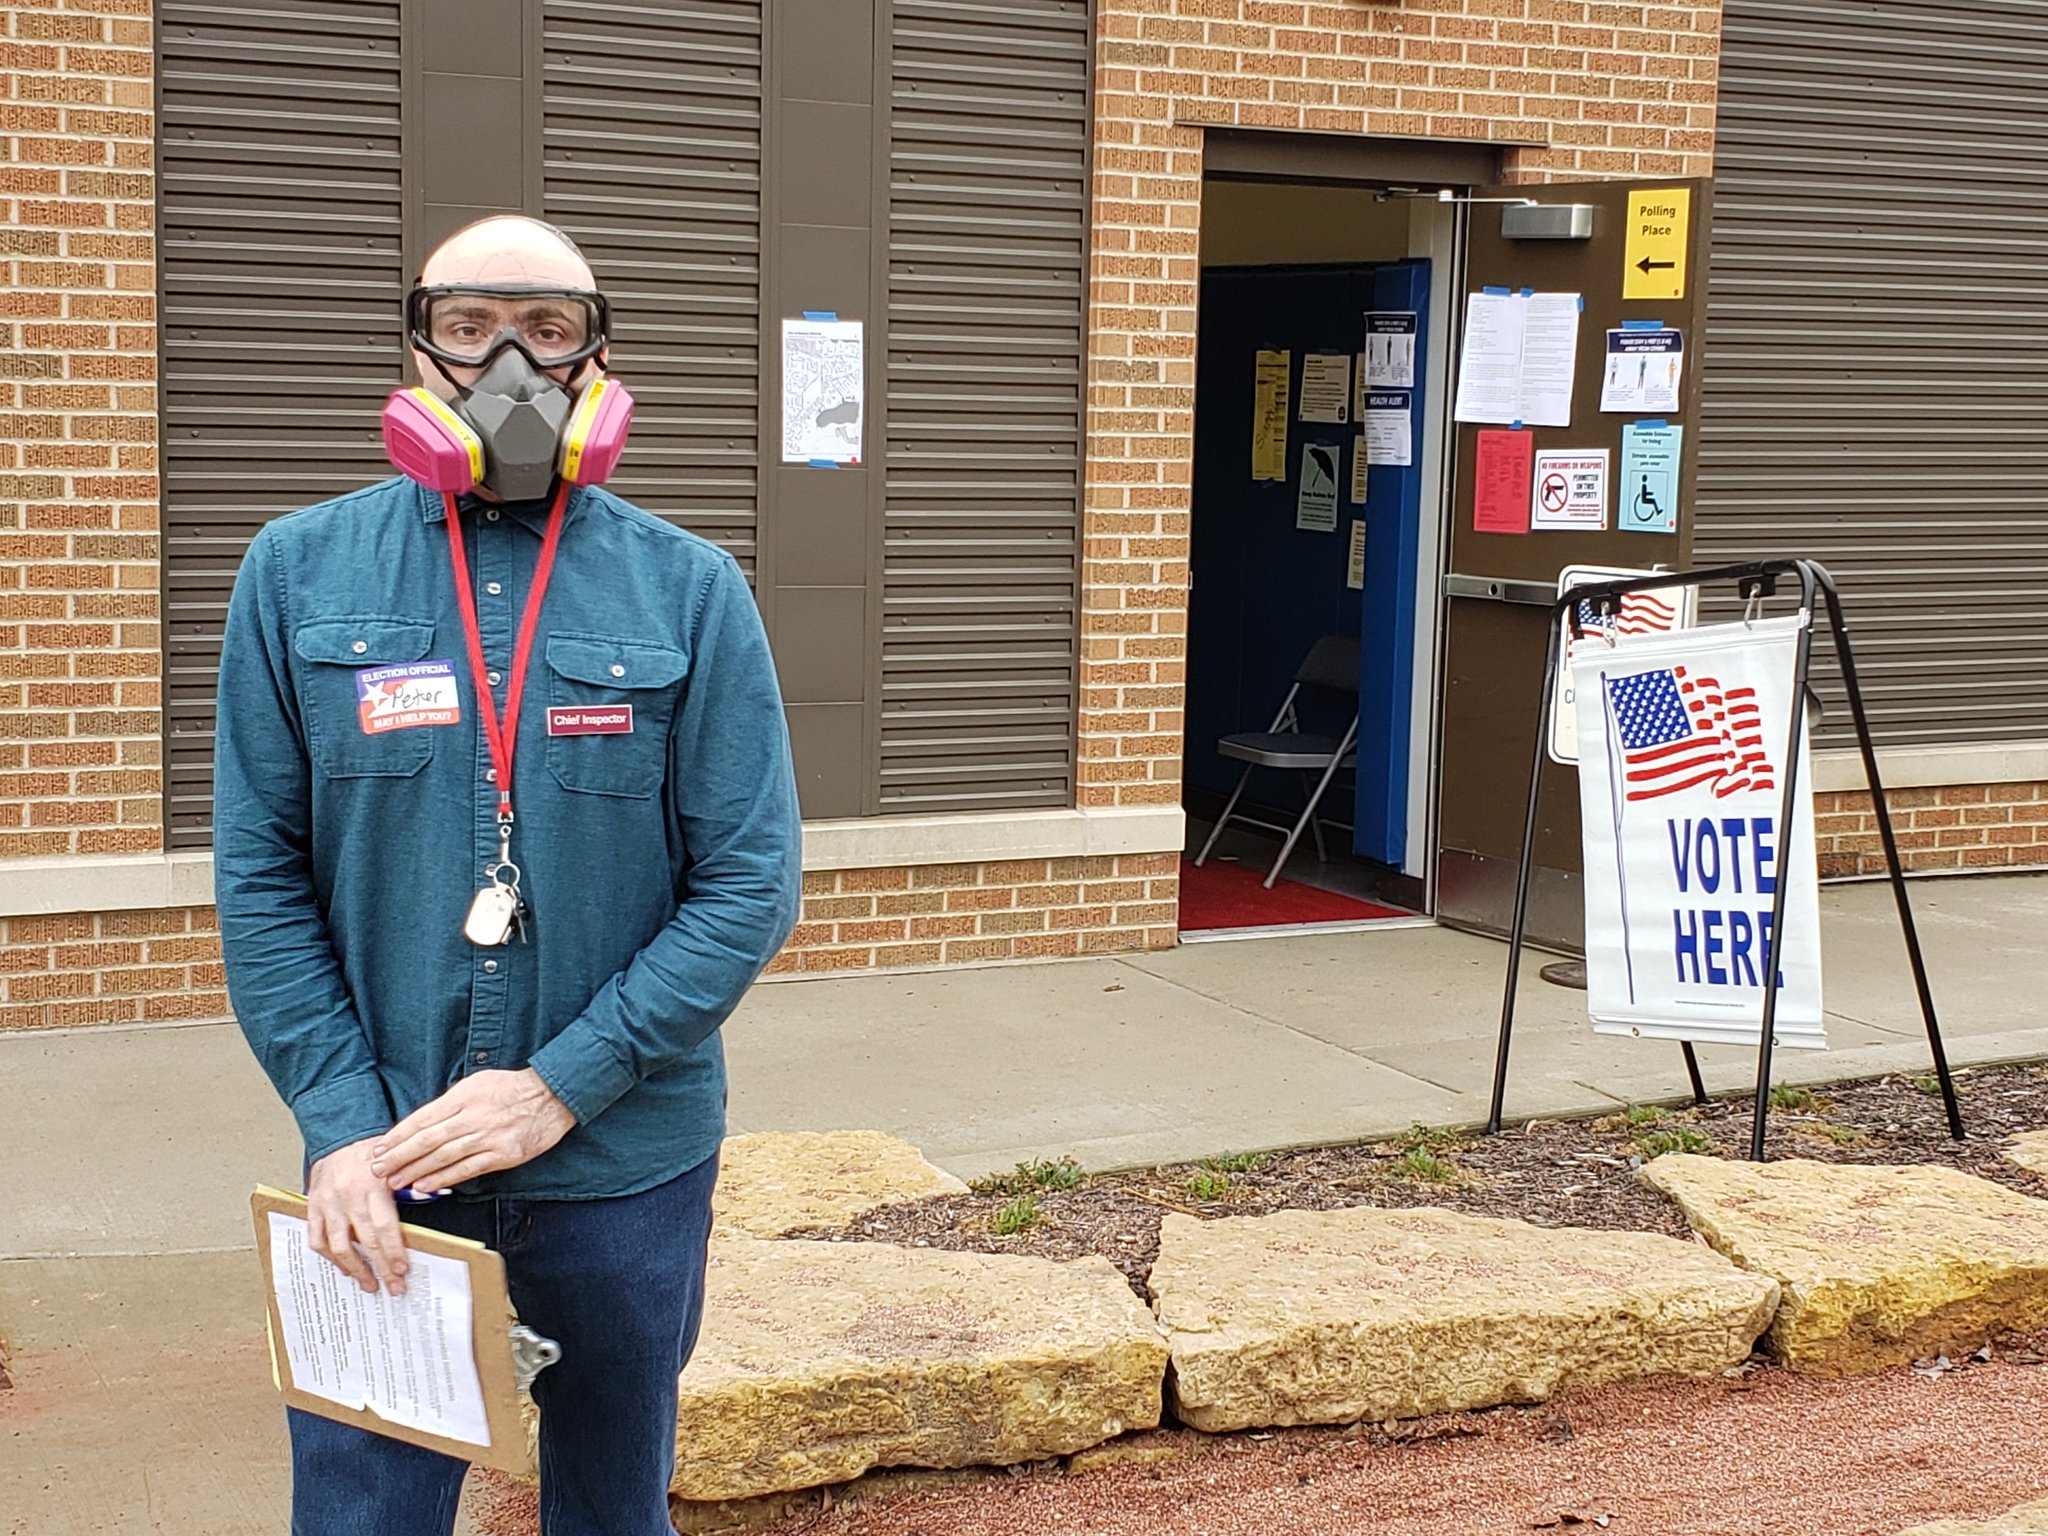 A poll worker in Madison works the polls amid the COVID-19 pandemic